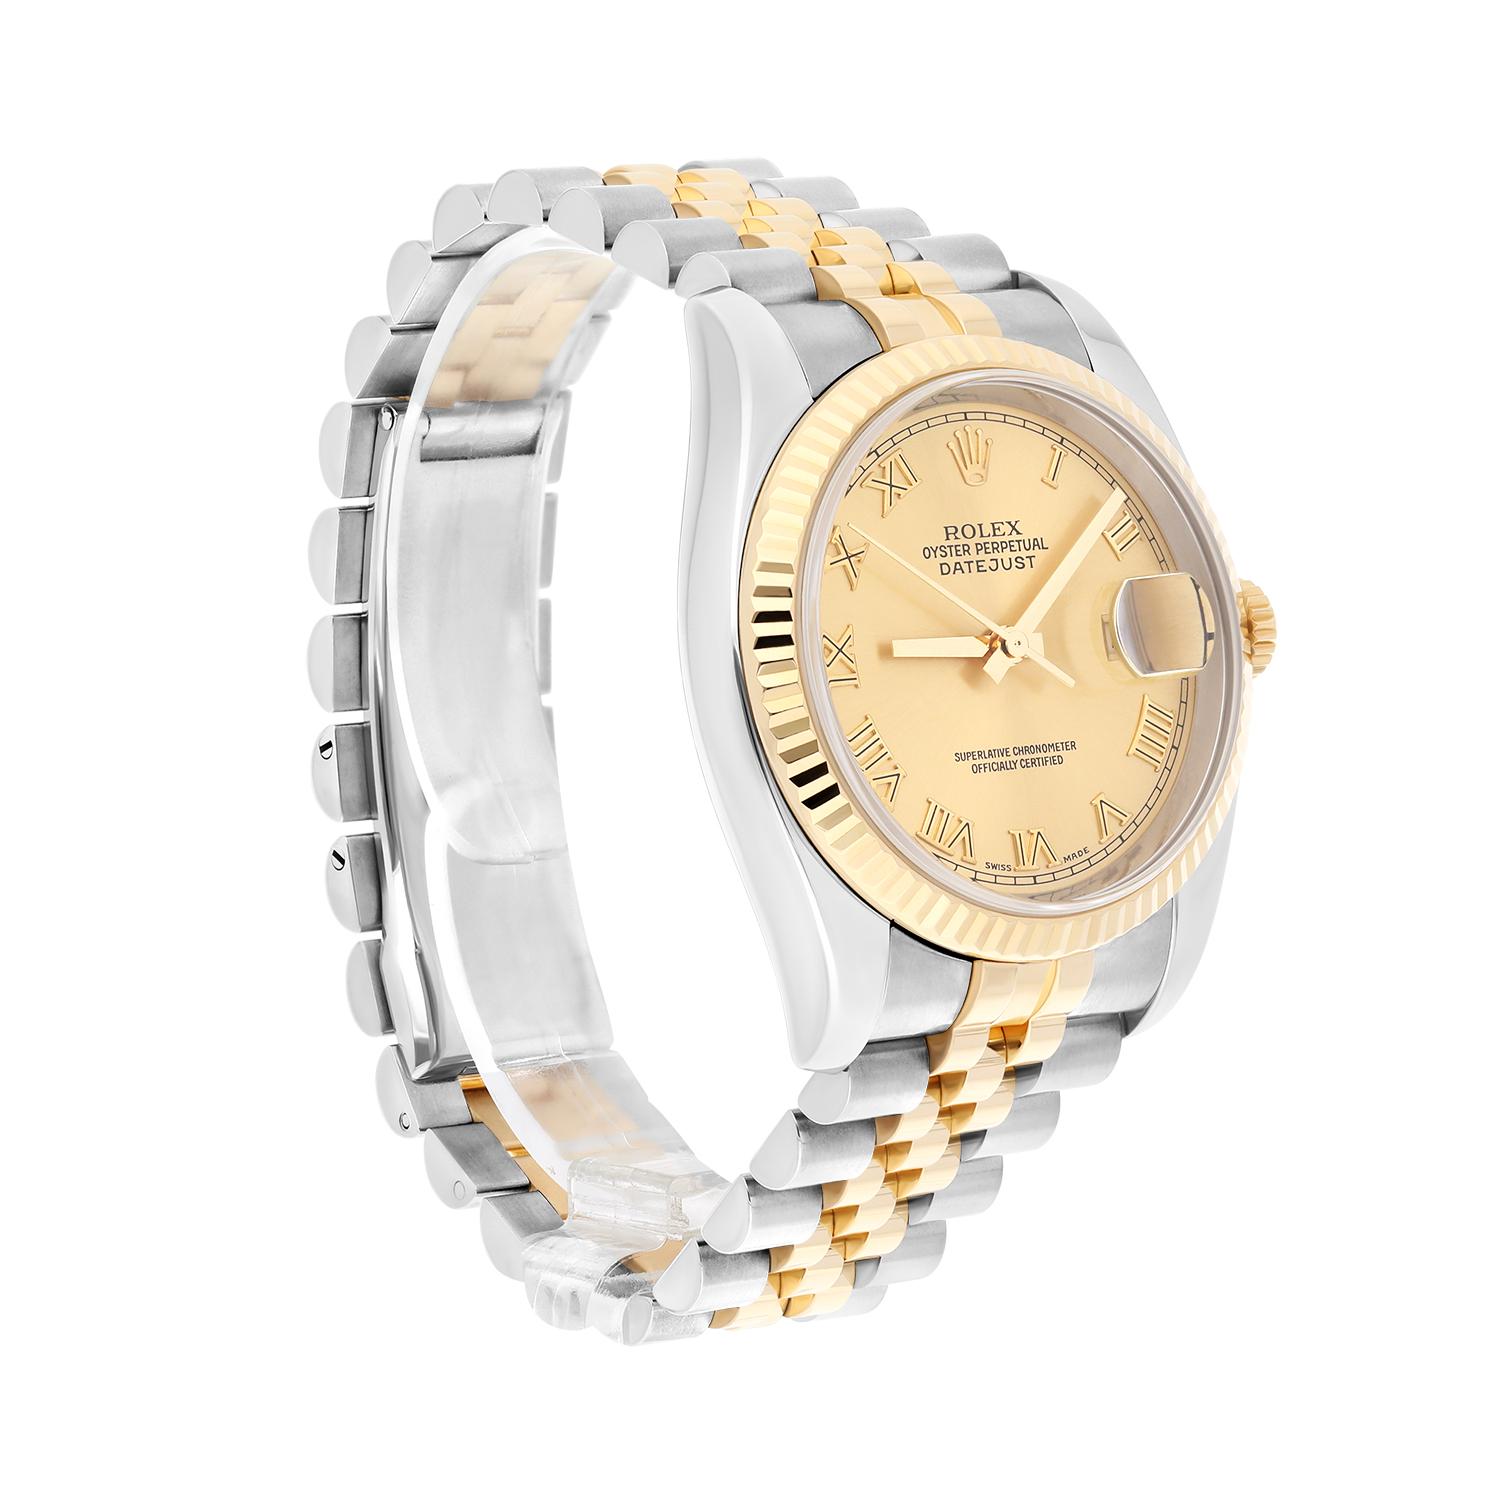 Rolex Datejust 36 Gold & Steel 116233 Watch Champagne Roman Dial Jubilee Watch In Excellent Condition For Sale In New York, NY